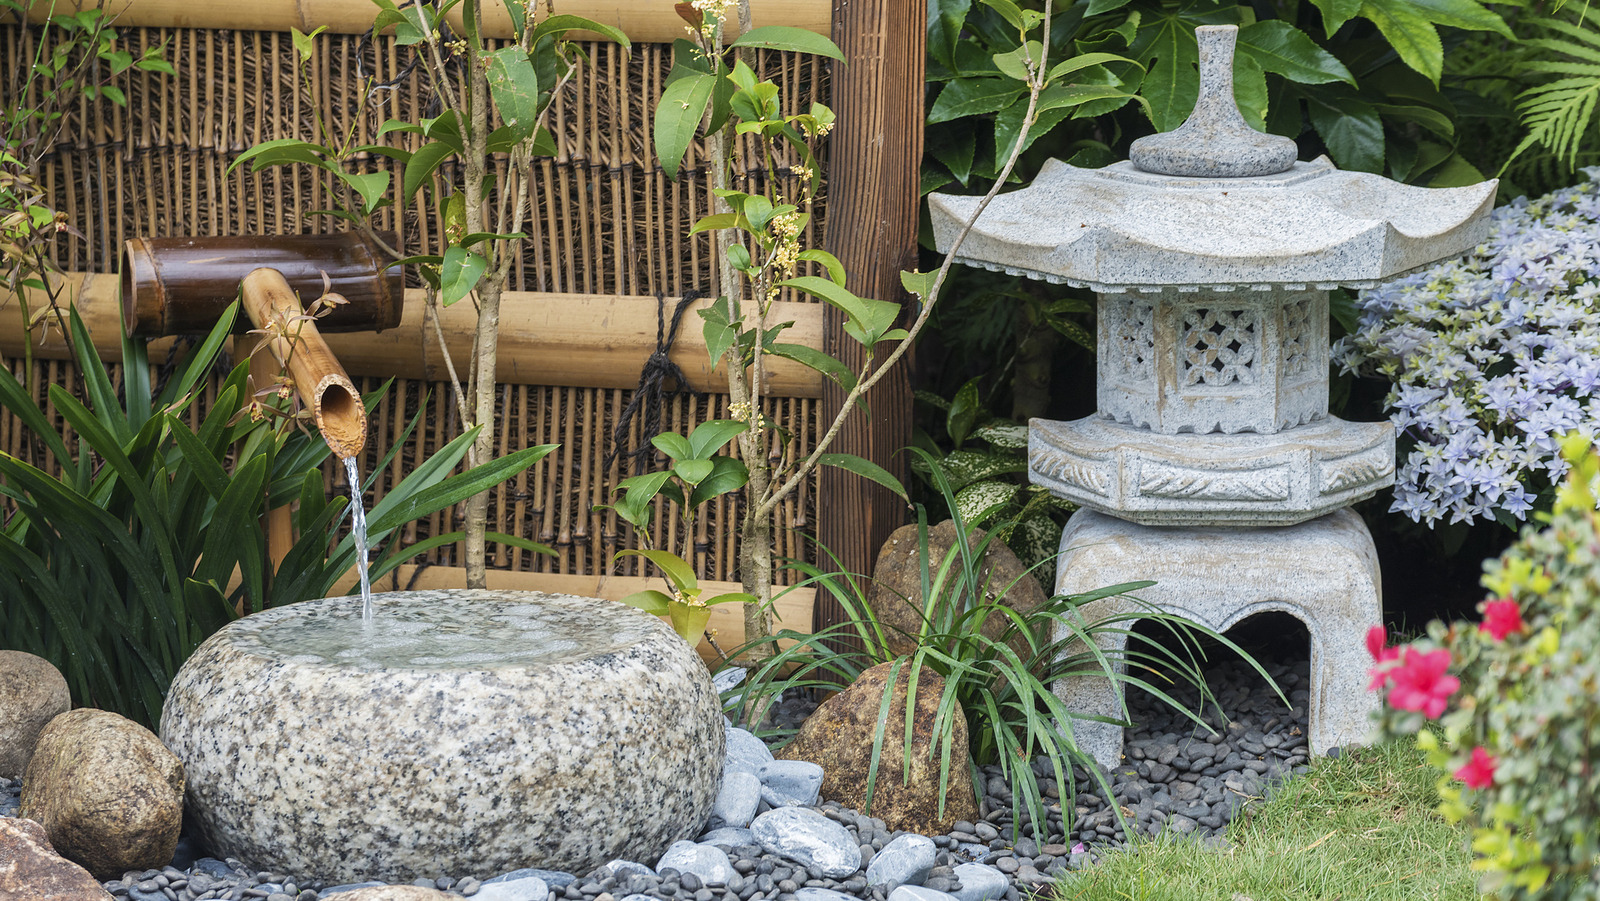 Get Inspired By These Tranquil Zen Gardens For Your Yard